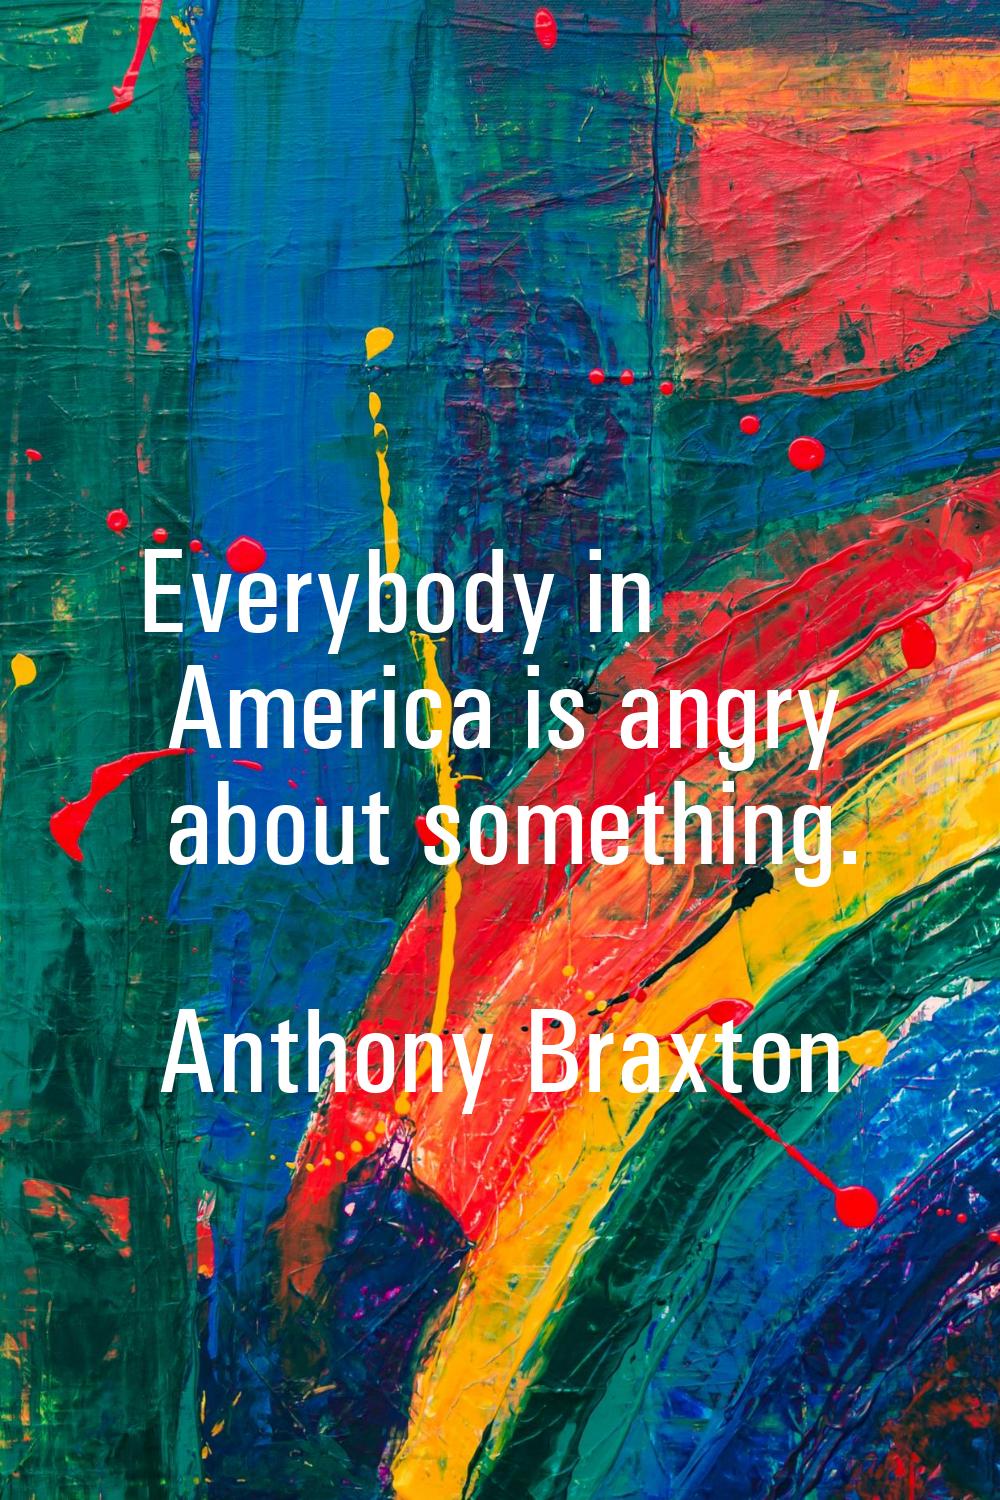 Everybody in America is angry about something.